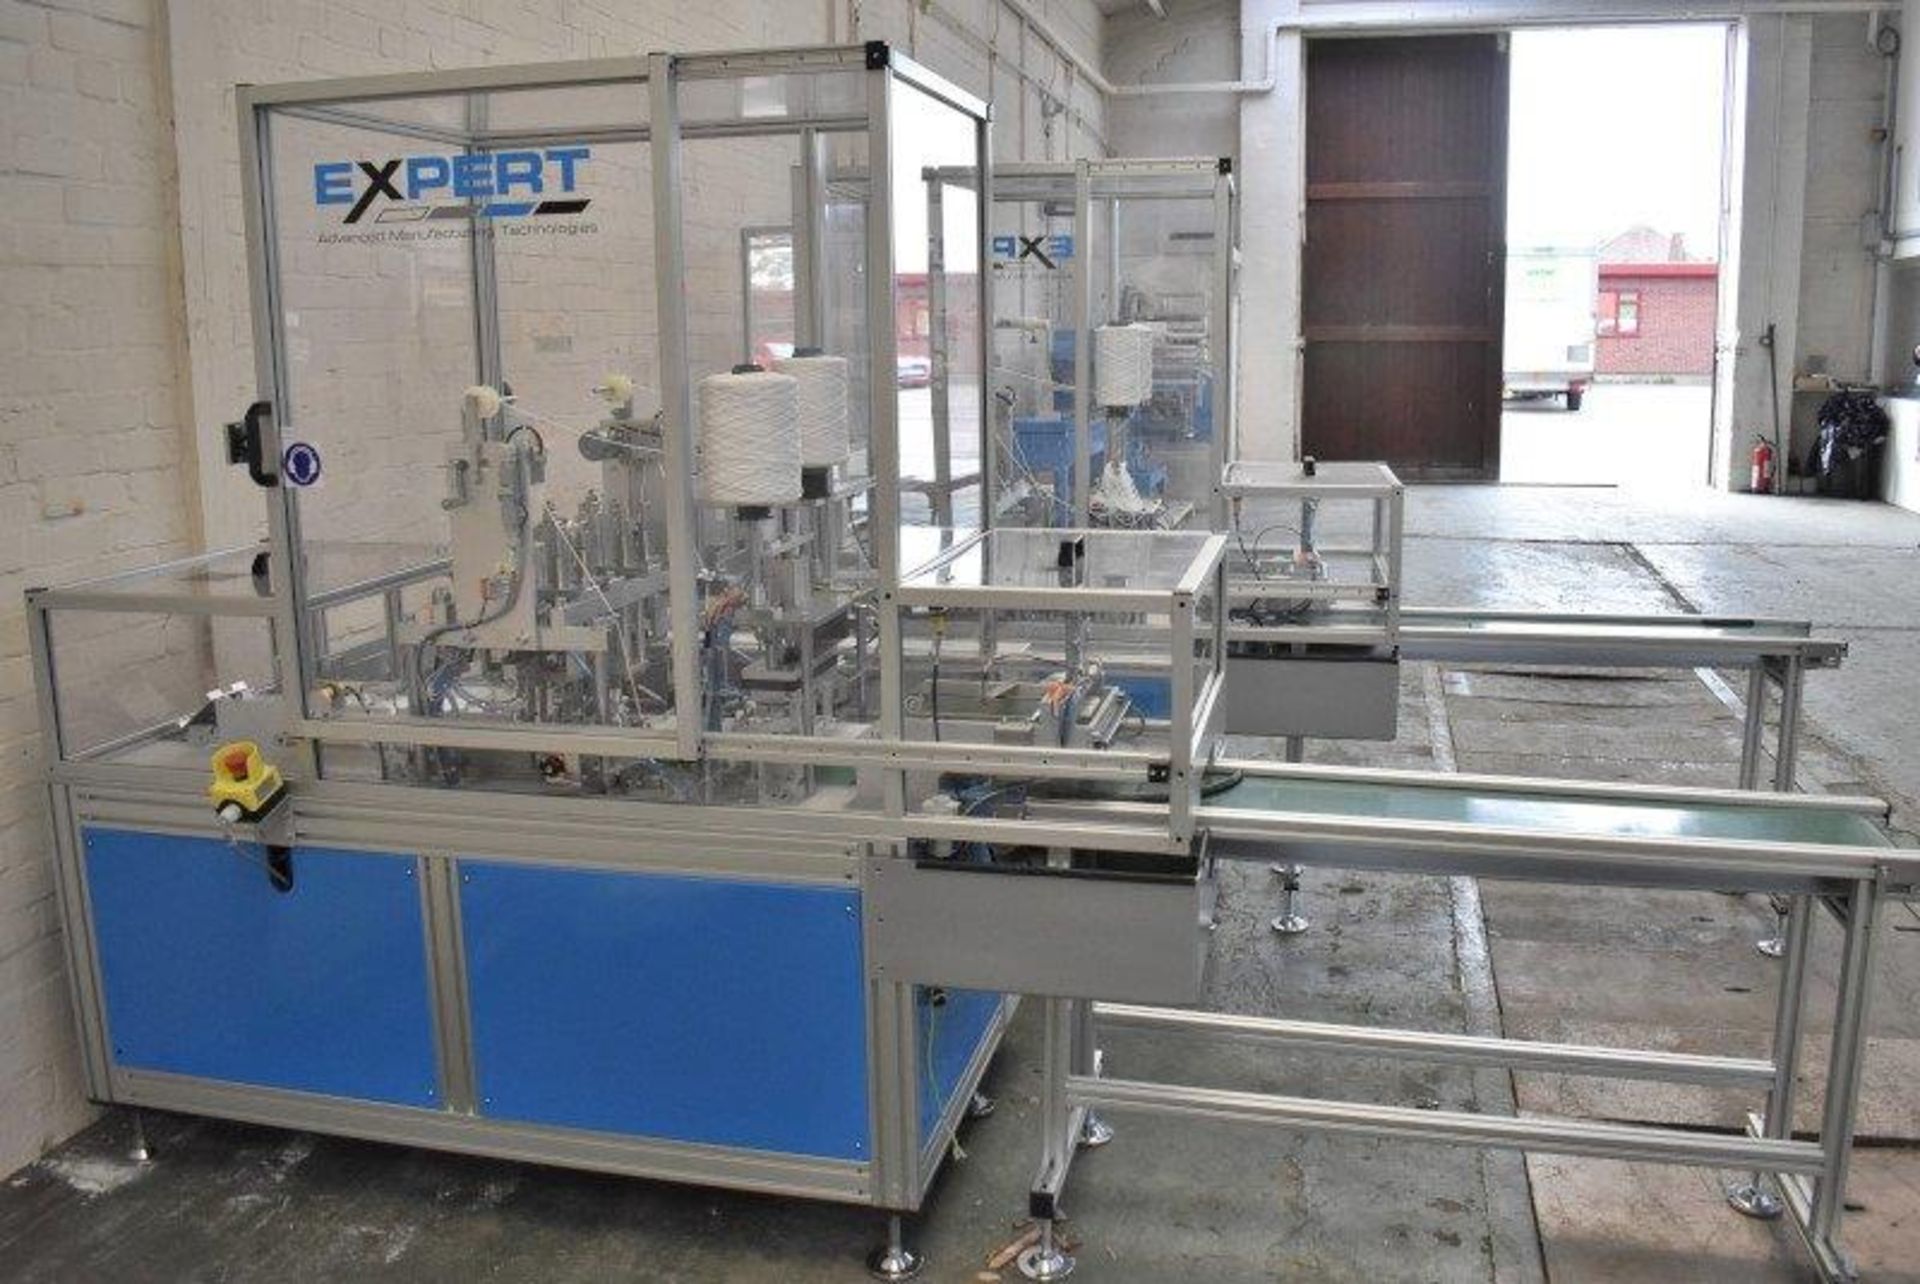 Expert fully automated Mask Making Machine - manufactured in 2020. - Image 16 of 20